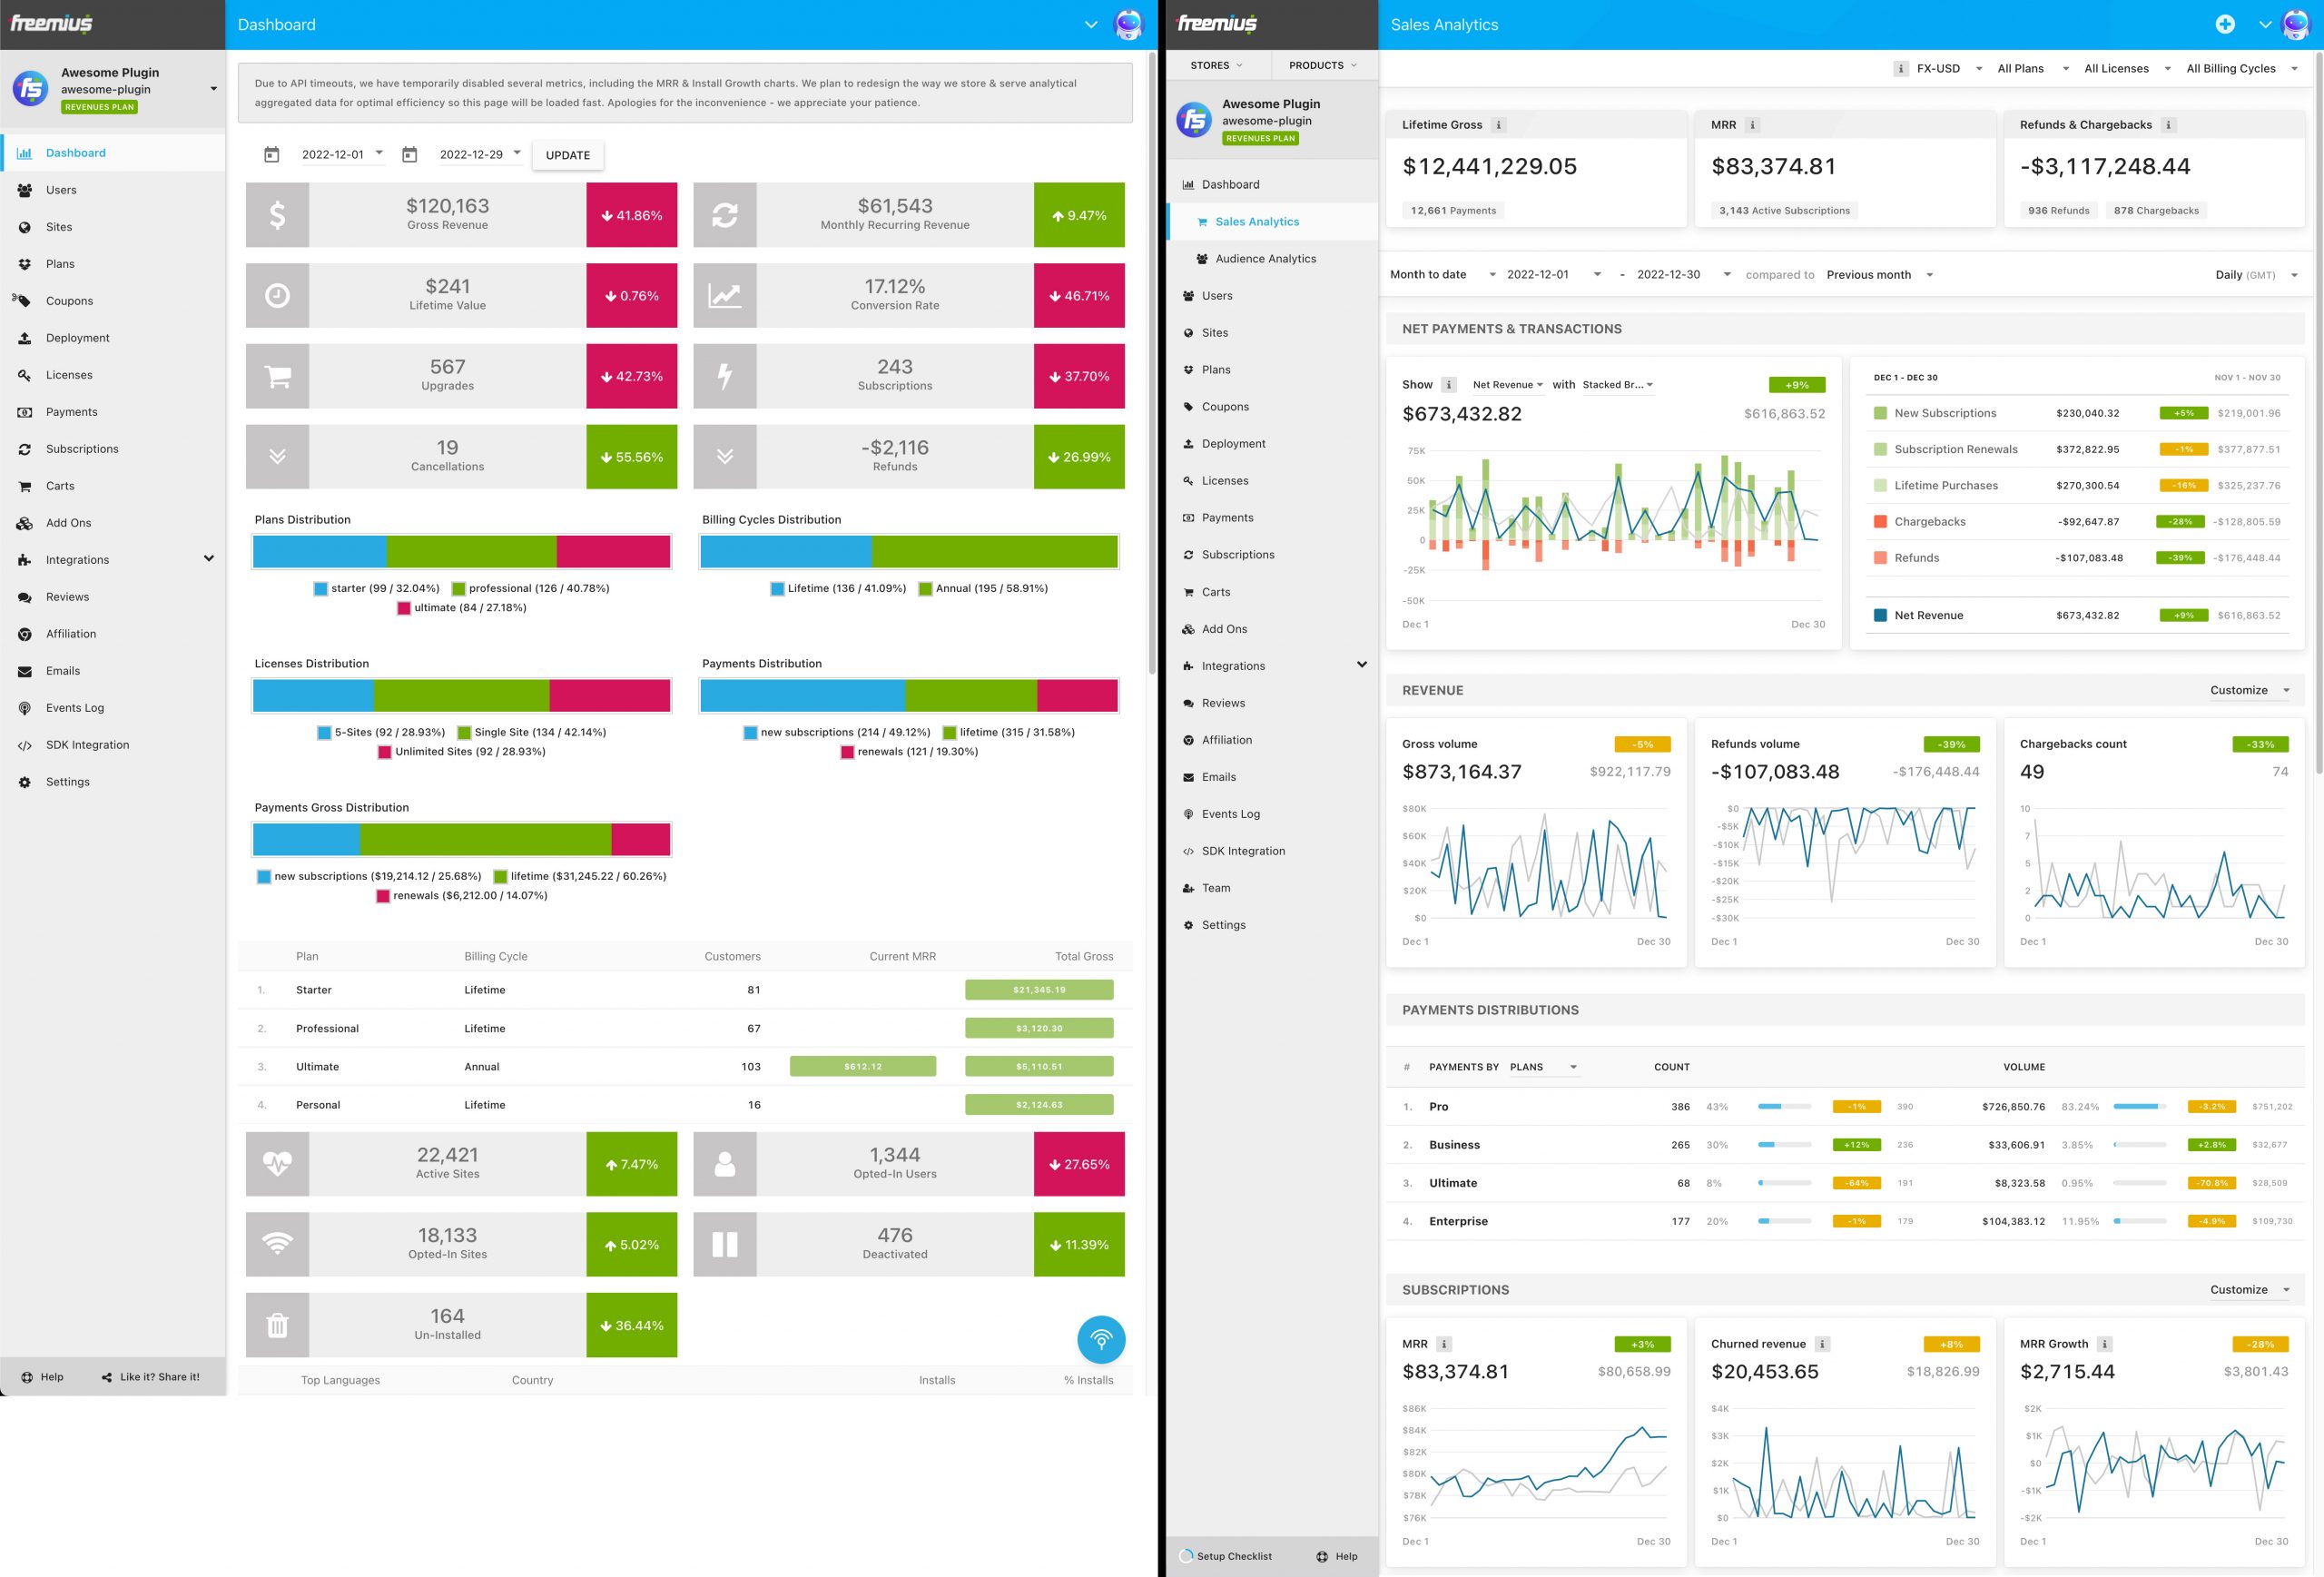 Comparison Of Legacy Dashboard And New Freemius Sales Analytics And Multi-Store Dashboard